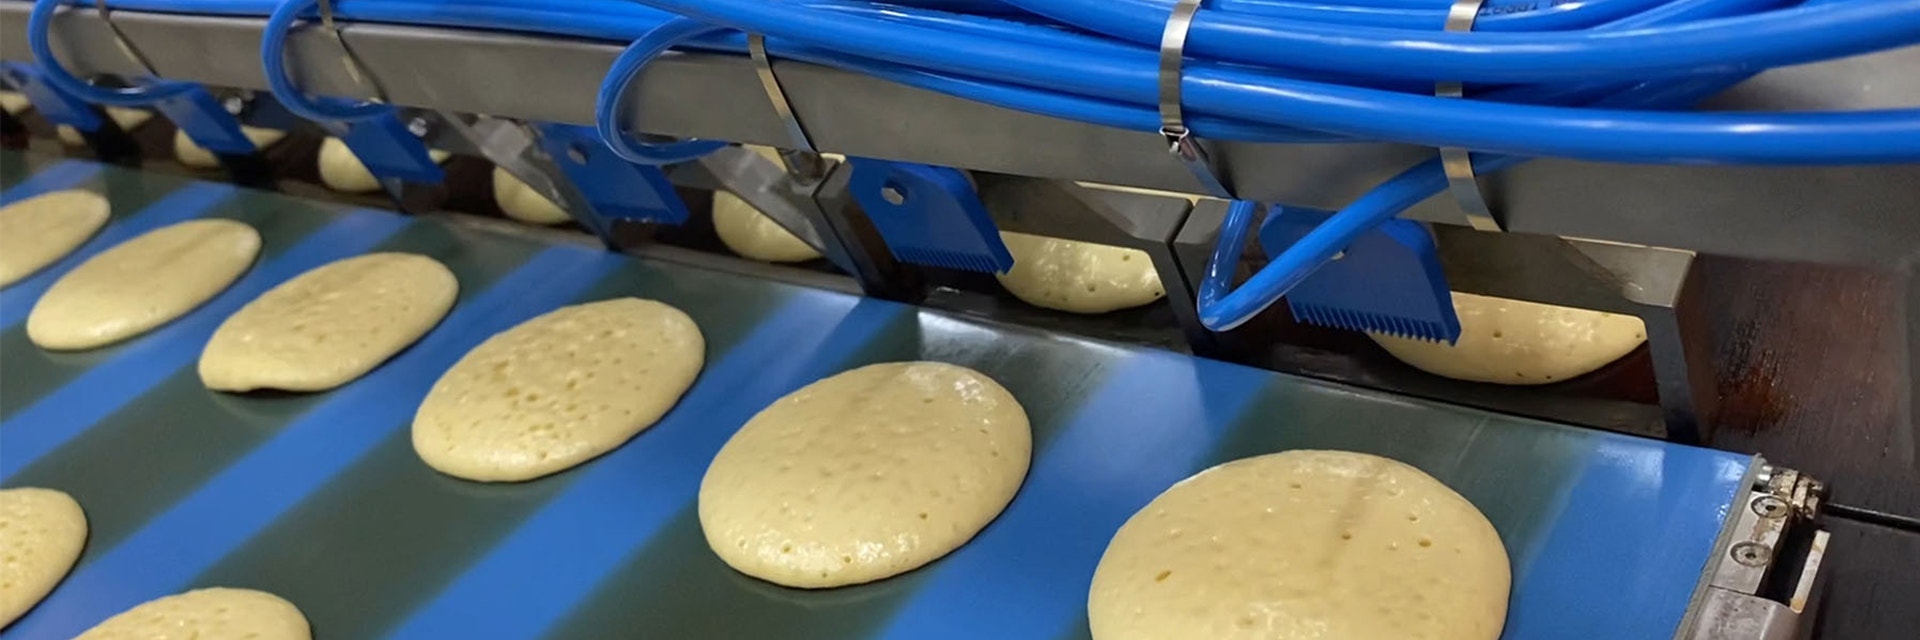 Pancake batter being poured out in a production line